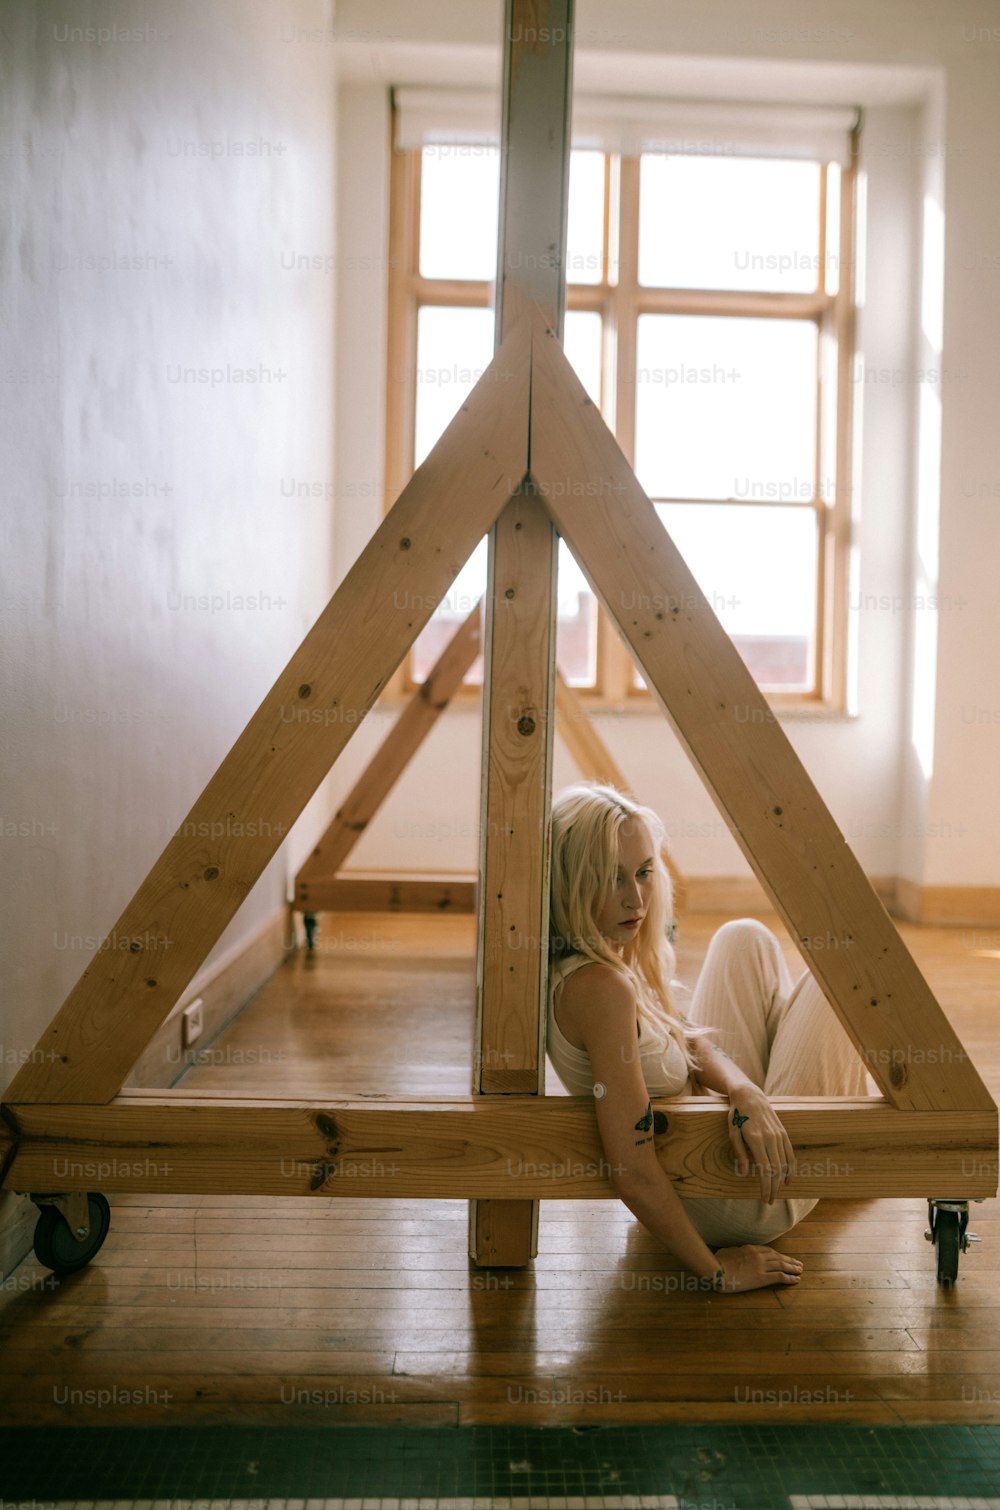 a woman sitting on the floor in front of a wooden structure